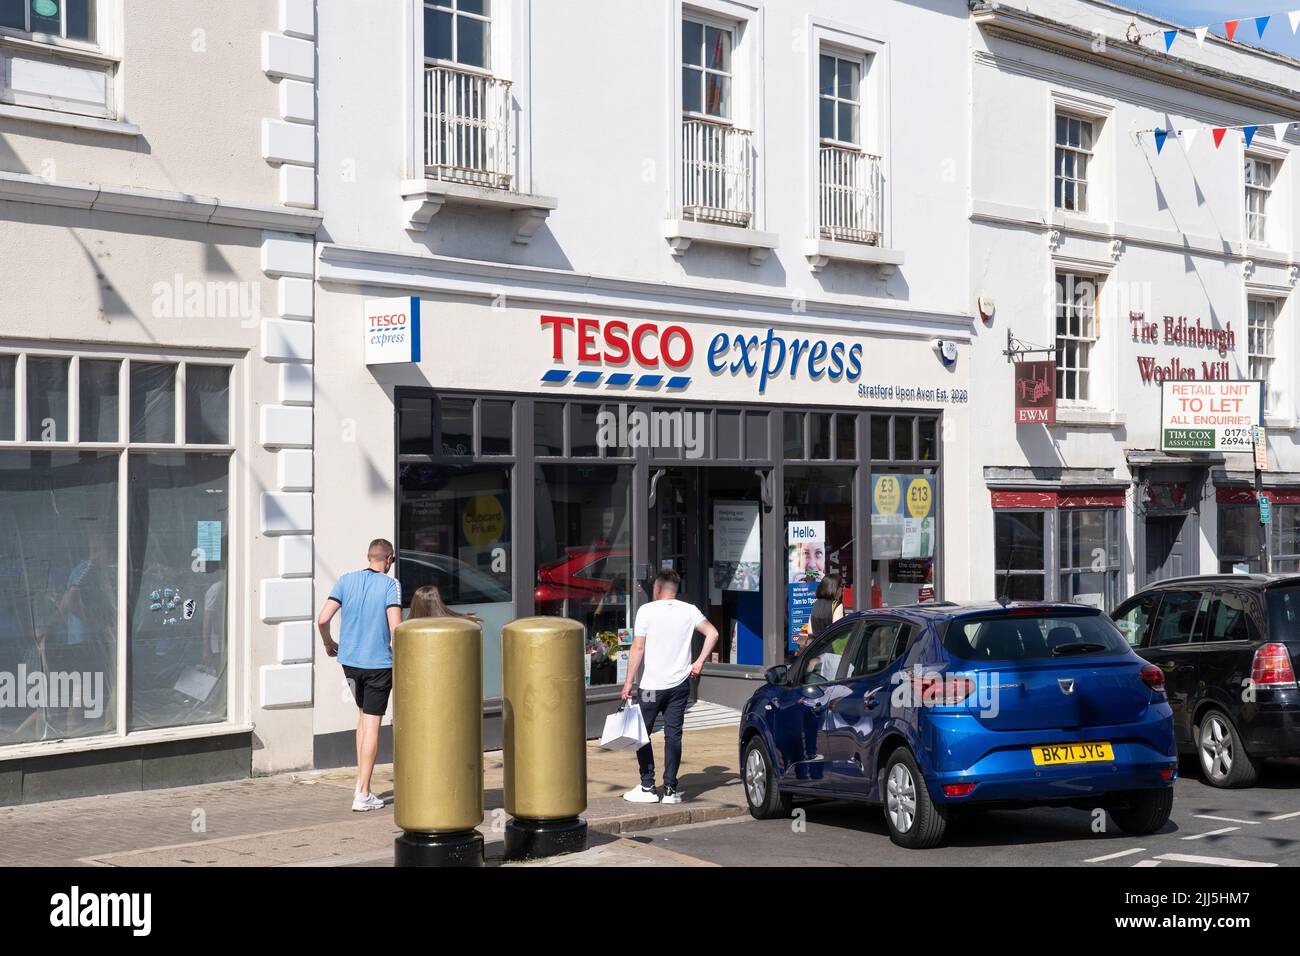 Shoppers entering a Tesco Express on Bridge Street in Stratford upon Avon, England. Concept - cost of living, food shopping, rising inflation Stock Photo